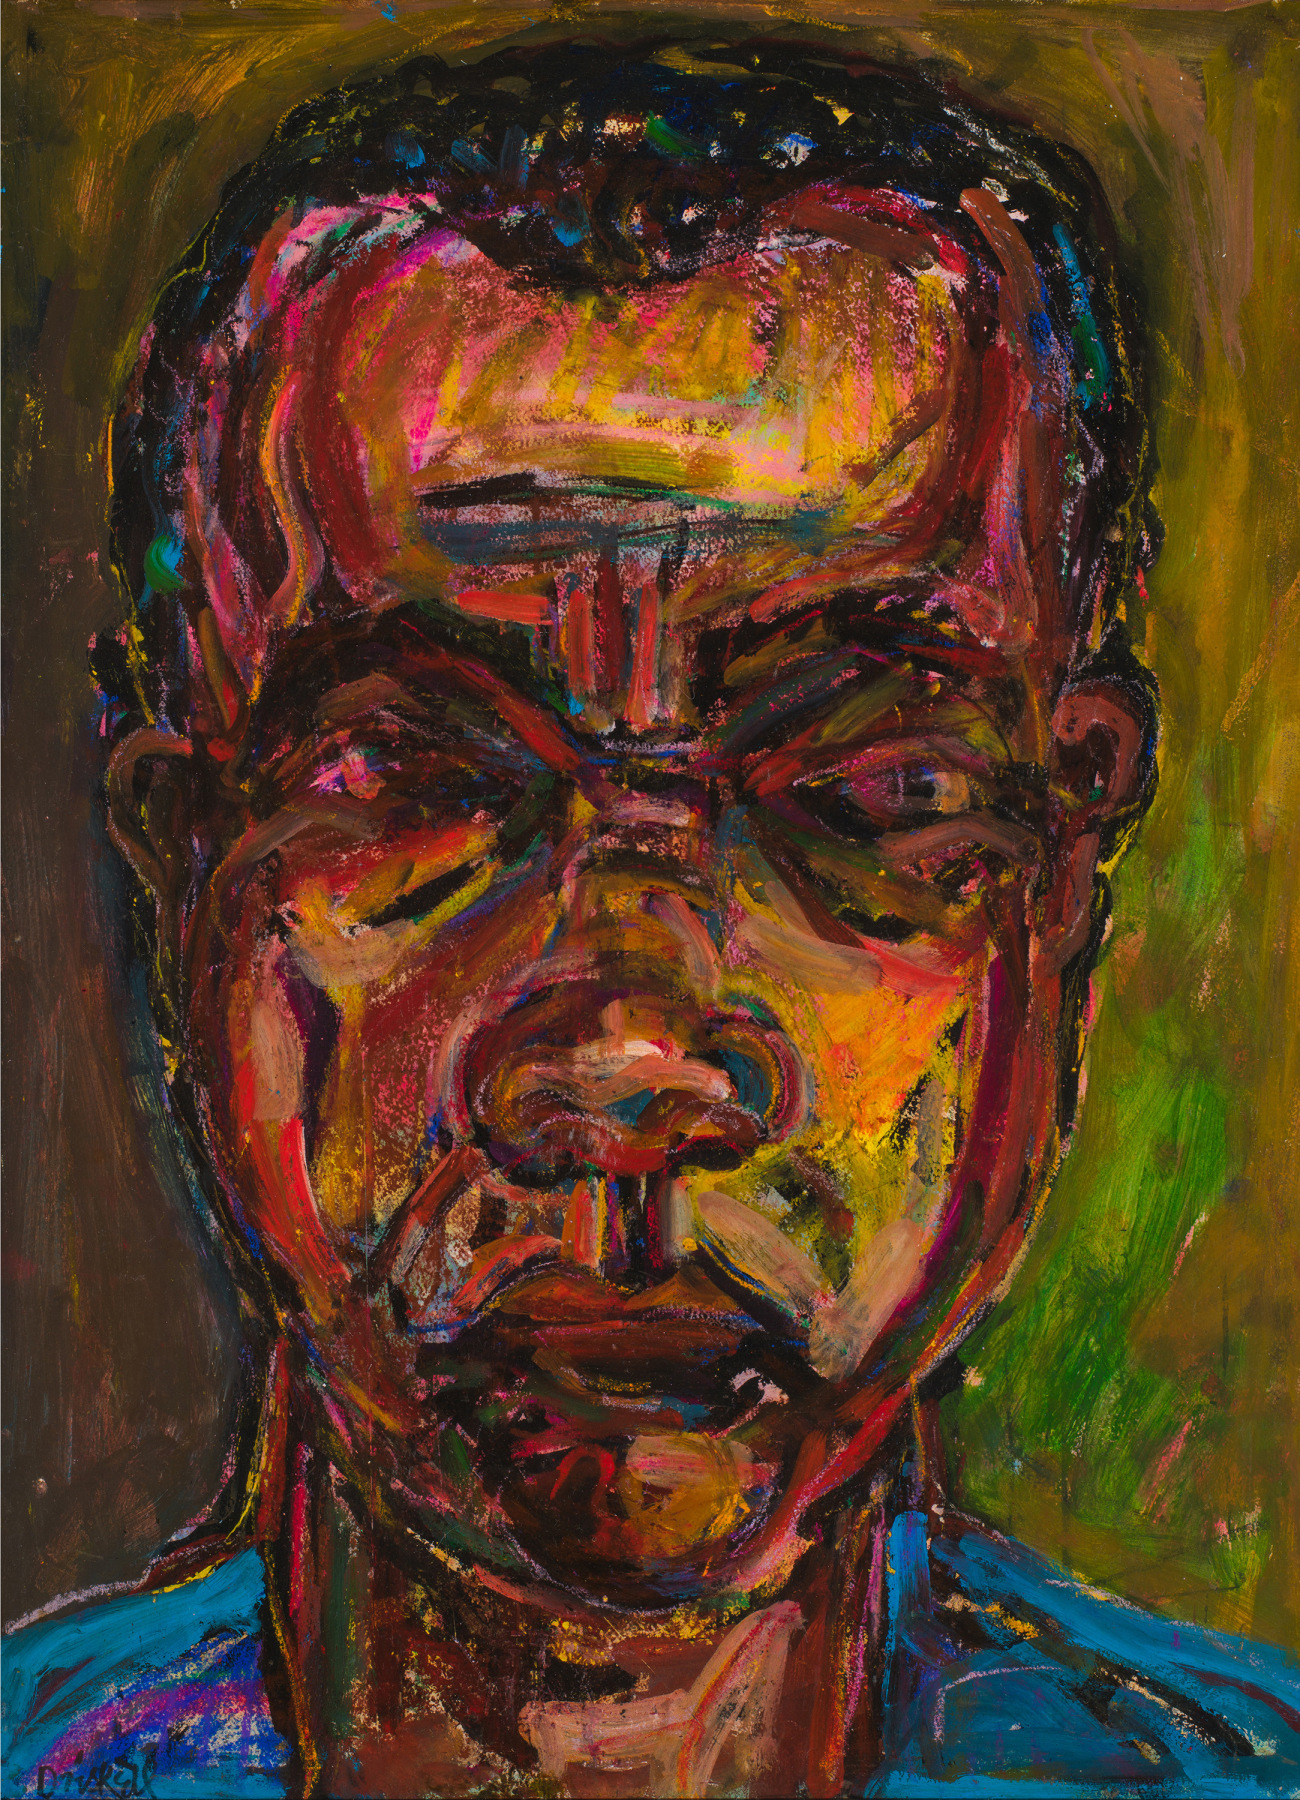 David Driskell: Mystery of the Masks - February 17 - March 26, 2022 - Viewing Room - DC Moore Gallery Viewing Room